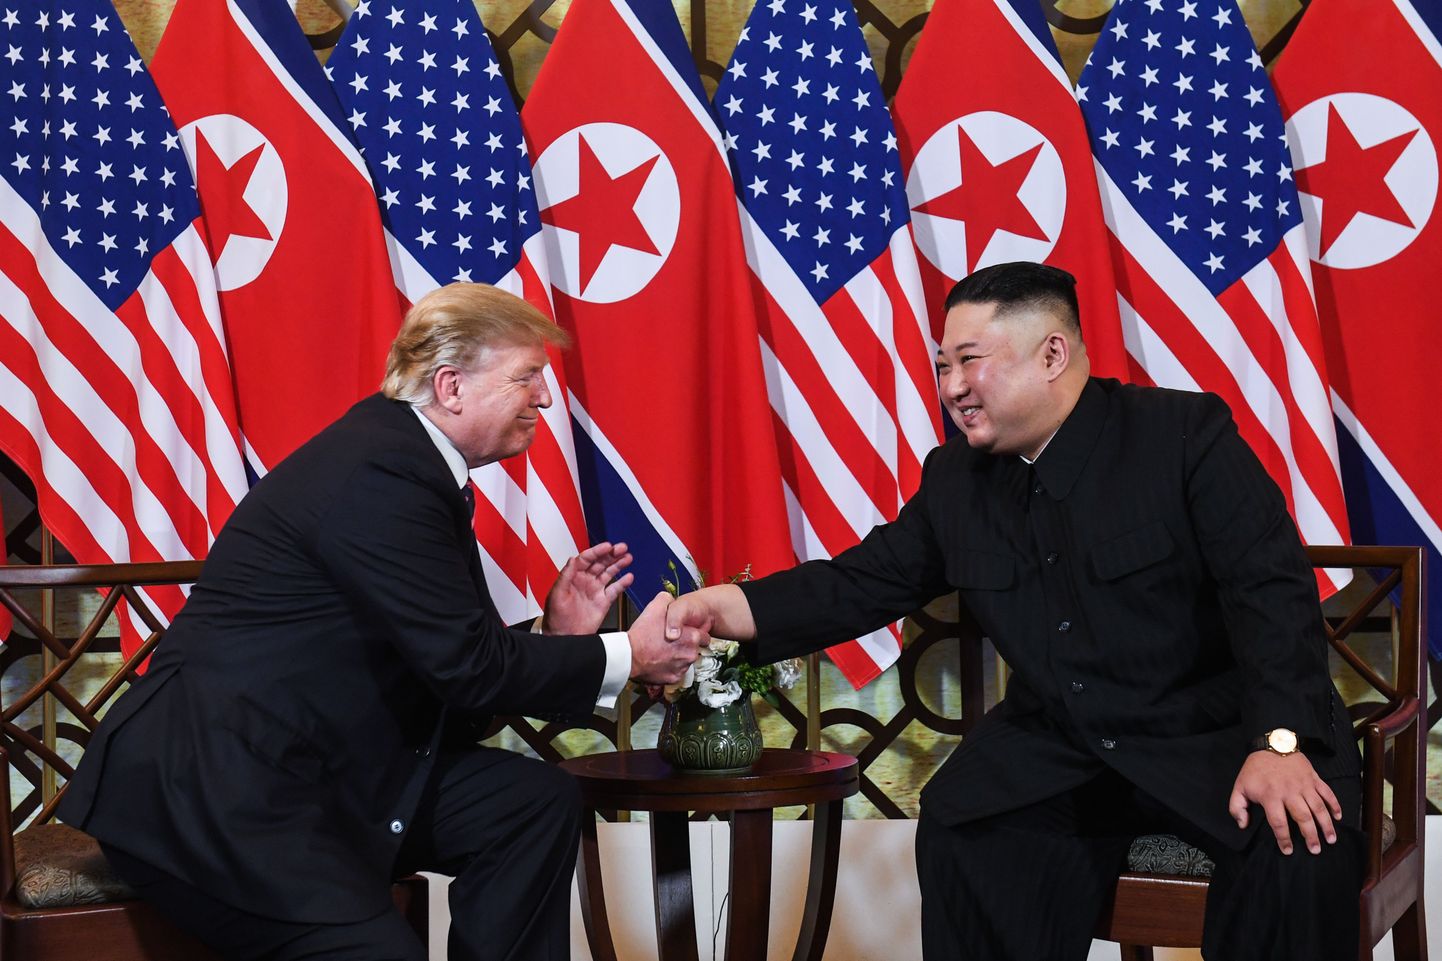 US President Donald Trump (L) shakes hands with North Korea's leader Kim Jong Un following a meeting at the Sofitel Legend Metropole hotel in Hanoi on February 27, 2019. (Photo by SAUL LOEB / AFP)